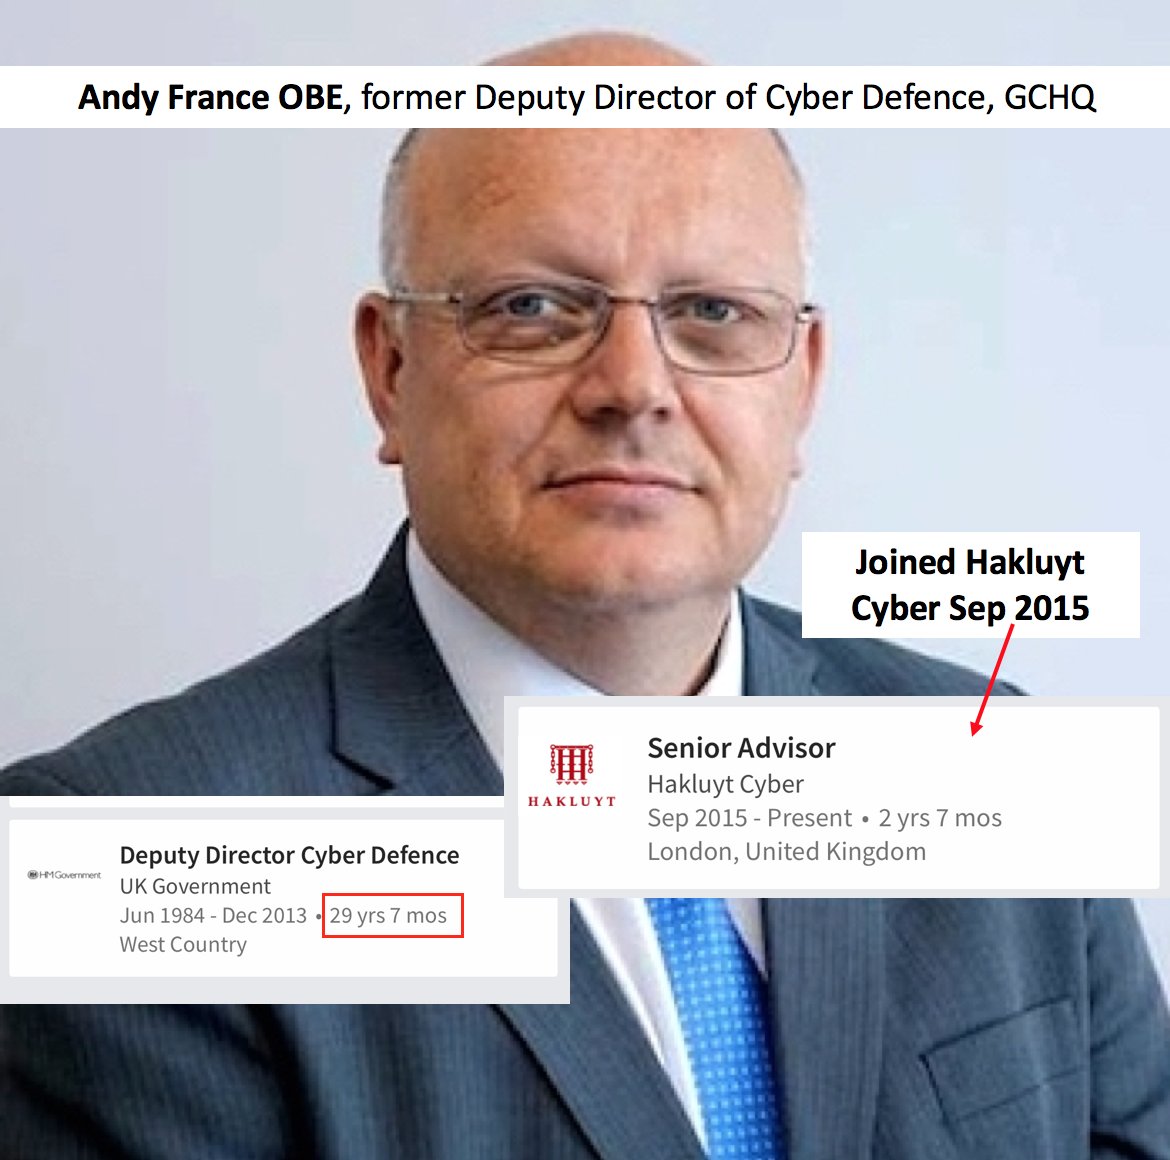 Hakluyt's links to British intel even extend beyond MI6. The day after  @realDonaldTrump announced his candidacy (Jun 16 '15), Hakluyt created a mutual firm: "Hakluyt Cyber Ltd". A 29-year veteran of GCHQ joined it Sep '15. The ex *Director* of GCHQ also joined the mgmt. board